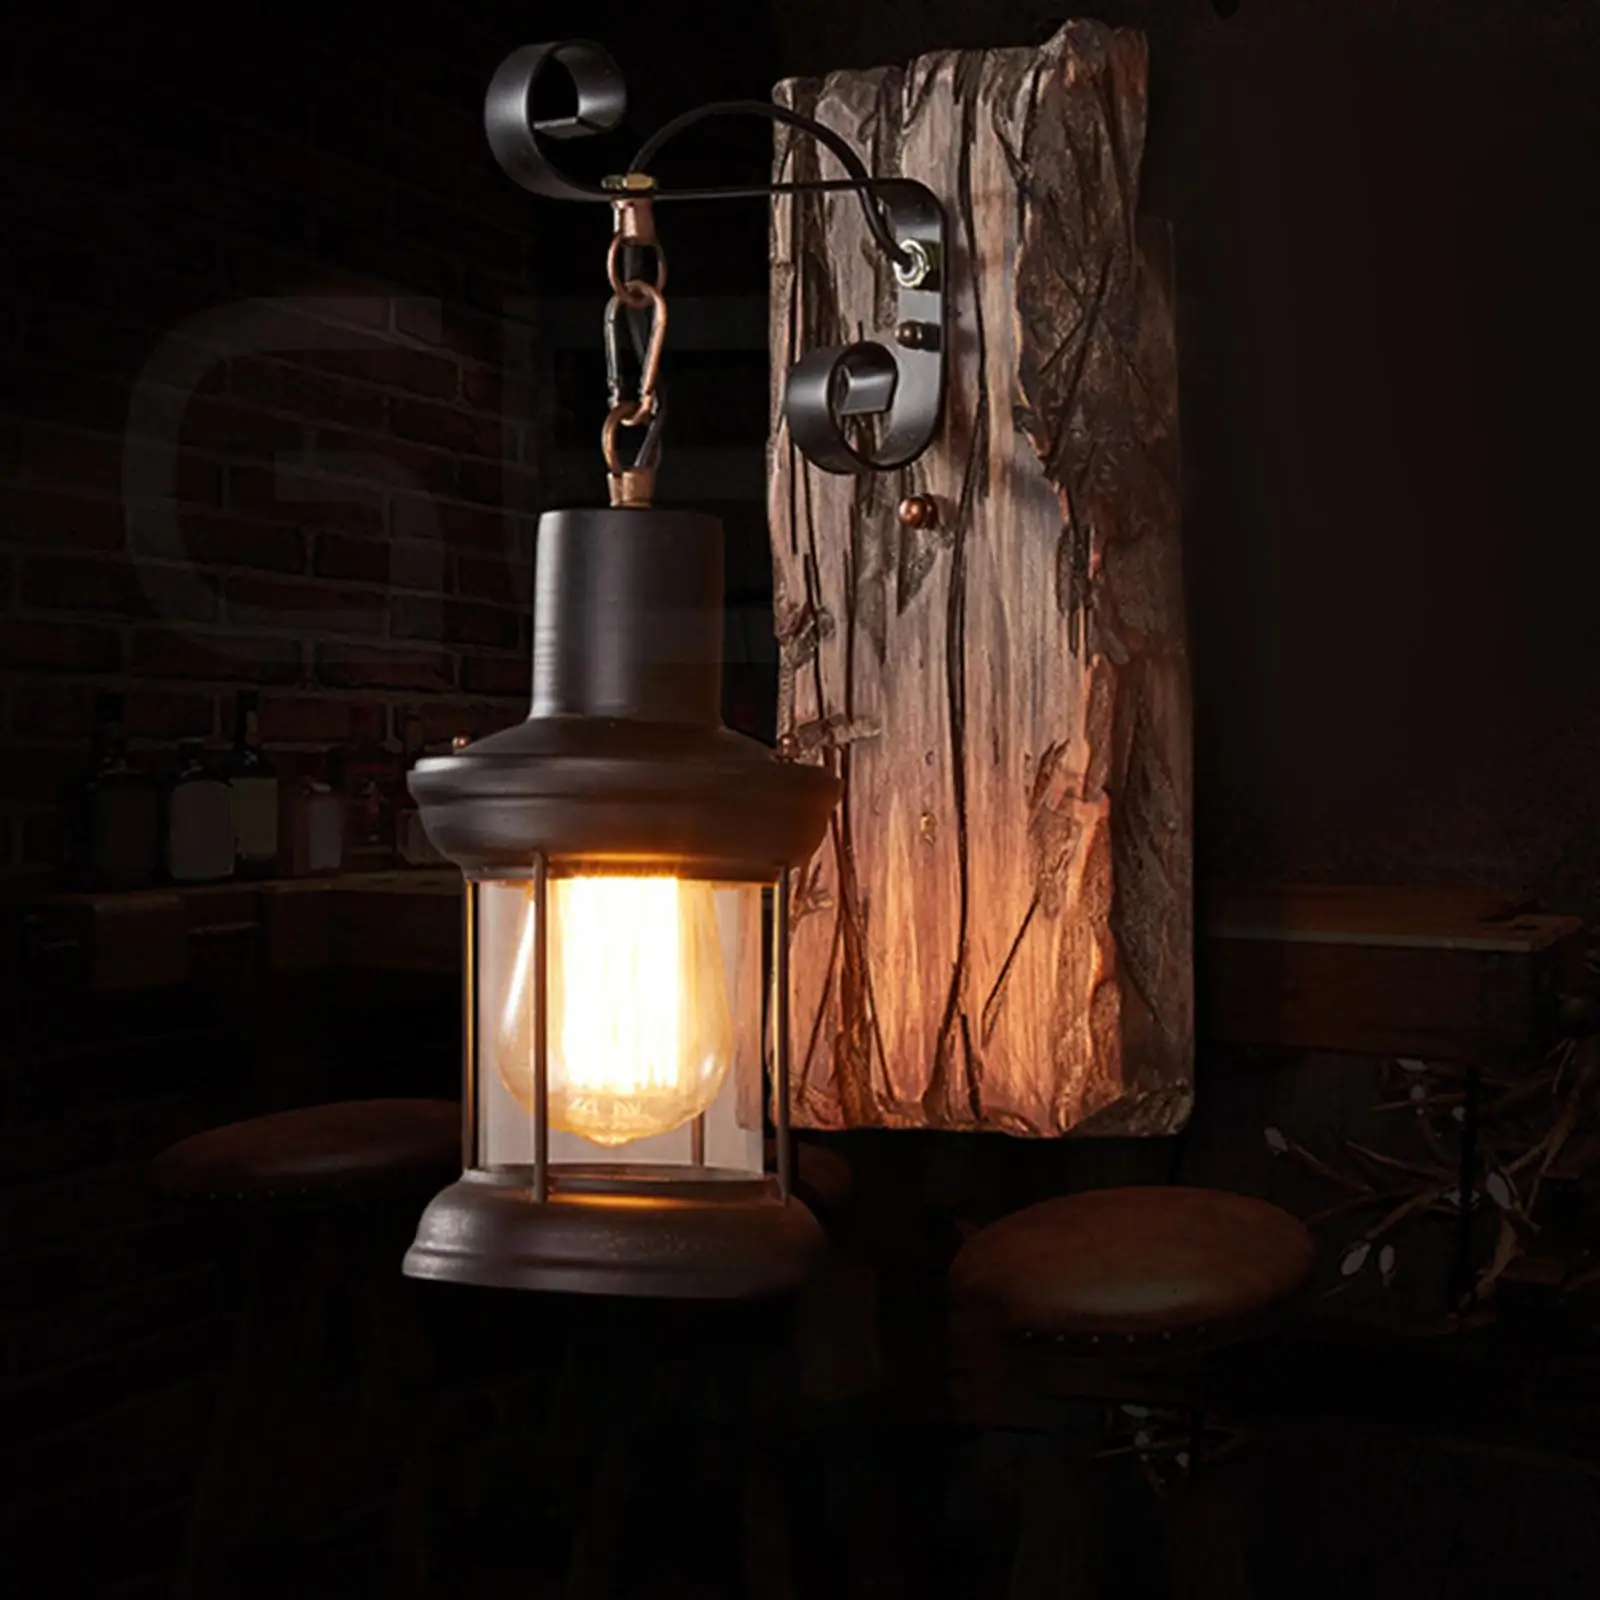 Antique Style Industrial Wood Wall Sconce Light E27 Rustic Bar for Hallway